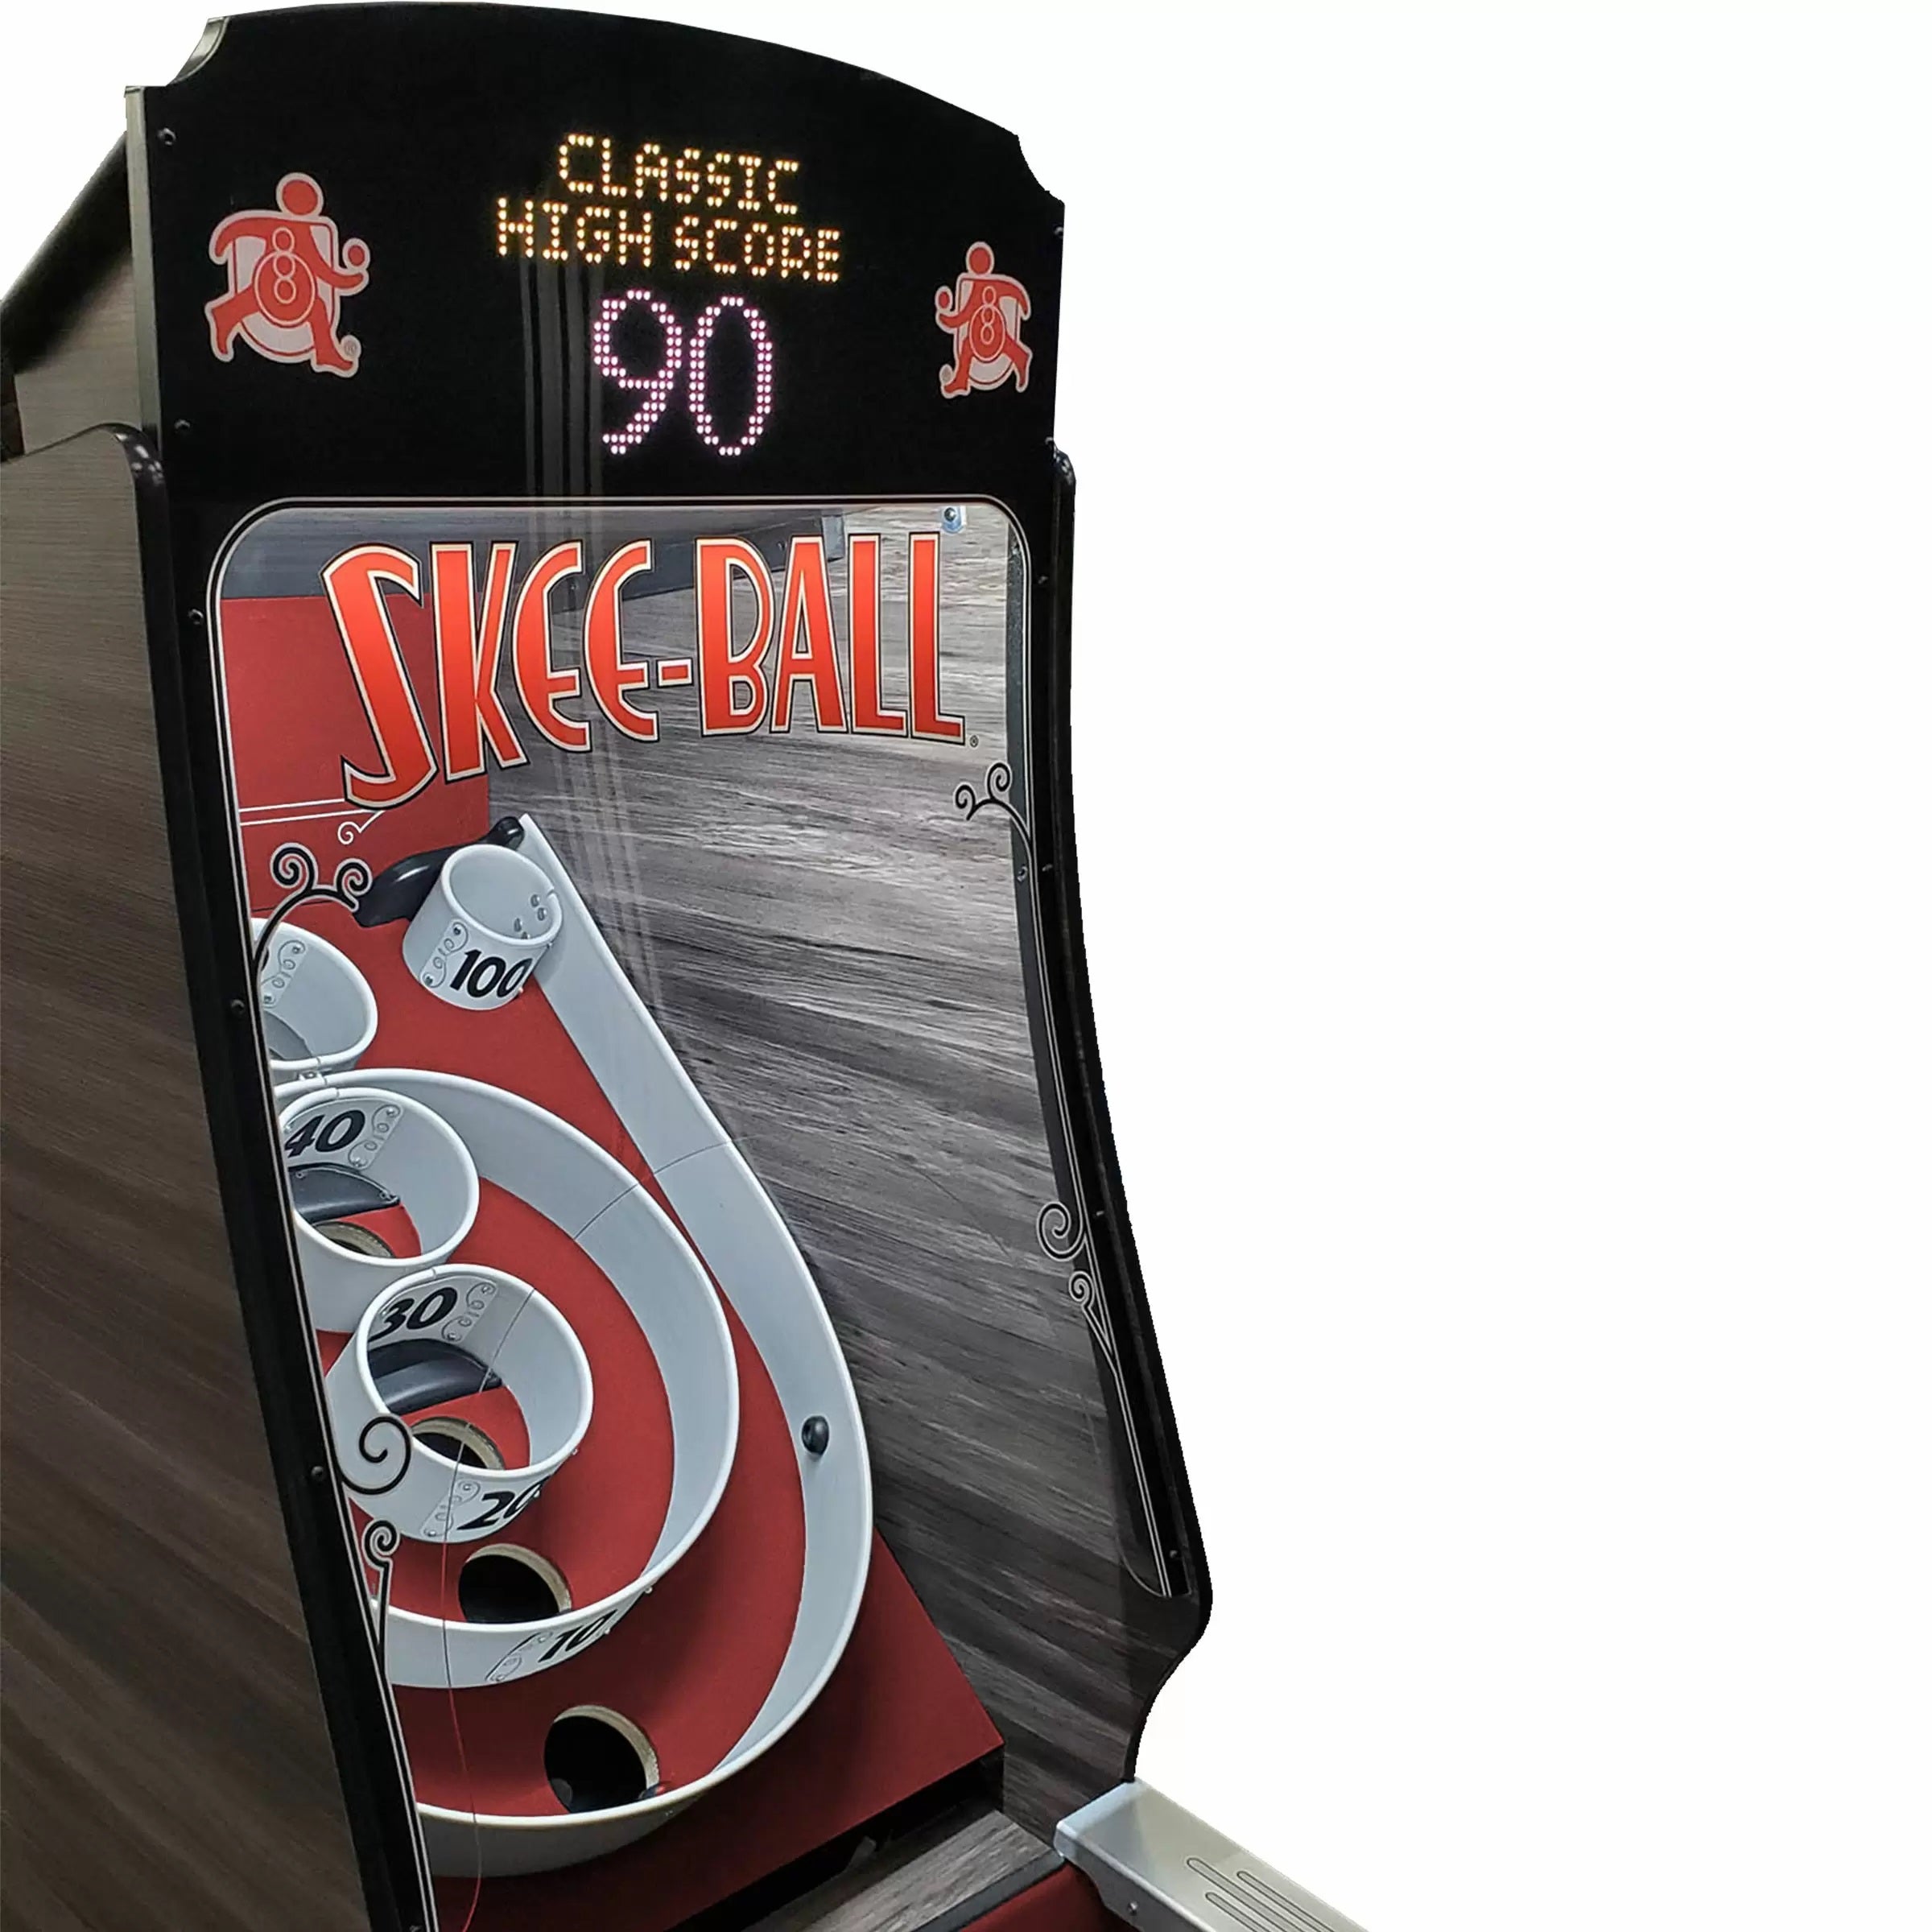 Imperial USA Home Arcade Premium Skee Ball with Scarlet Cork Front Board